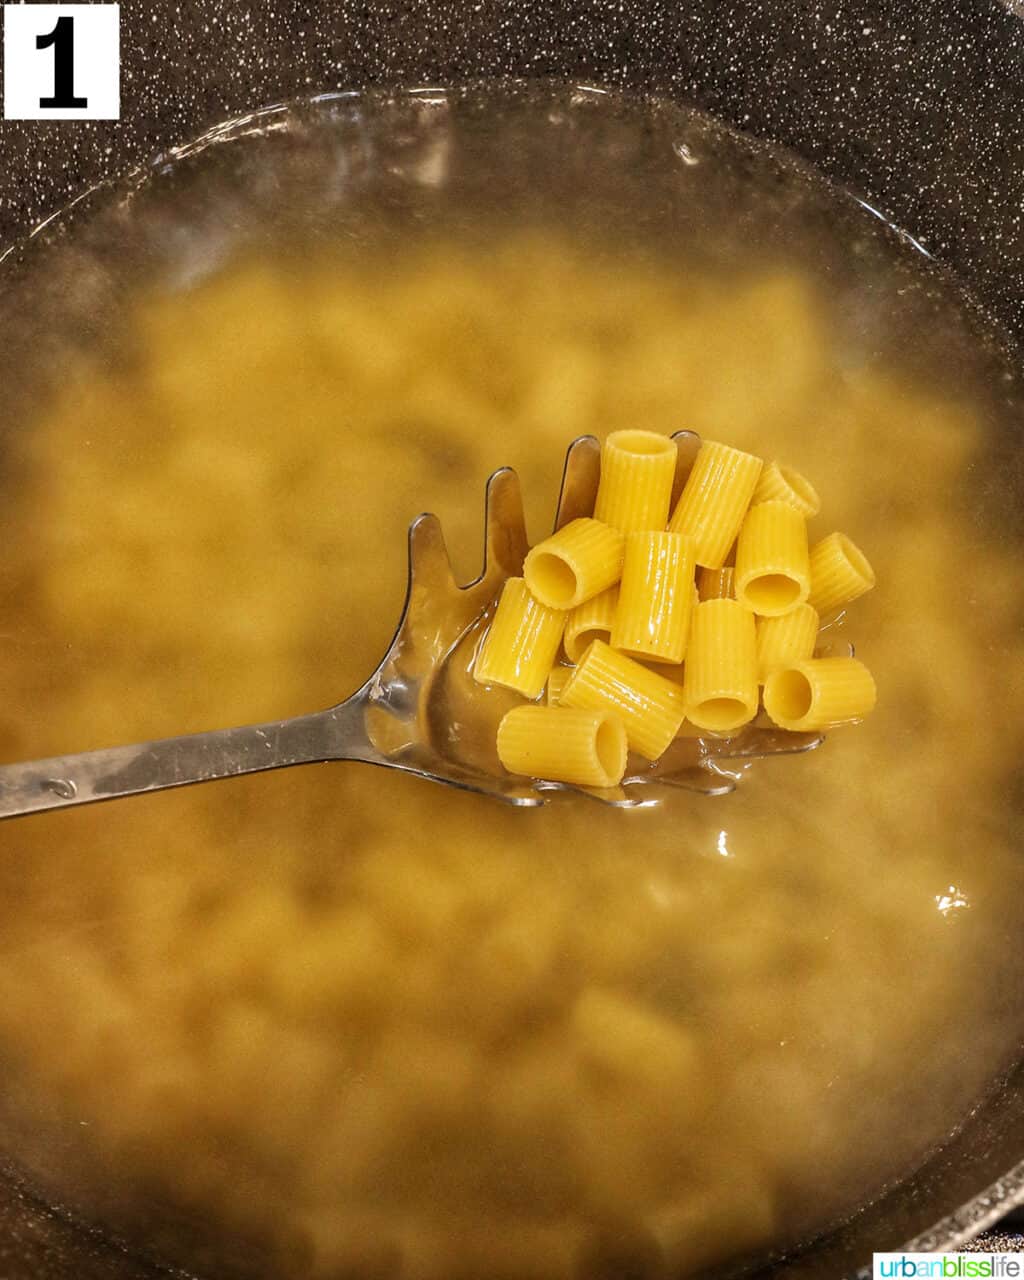 rigatoni in a large pot of water.